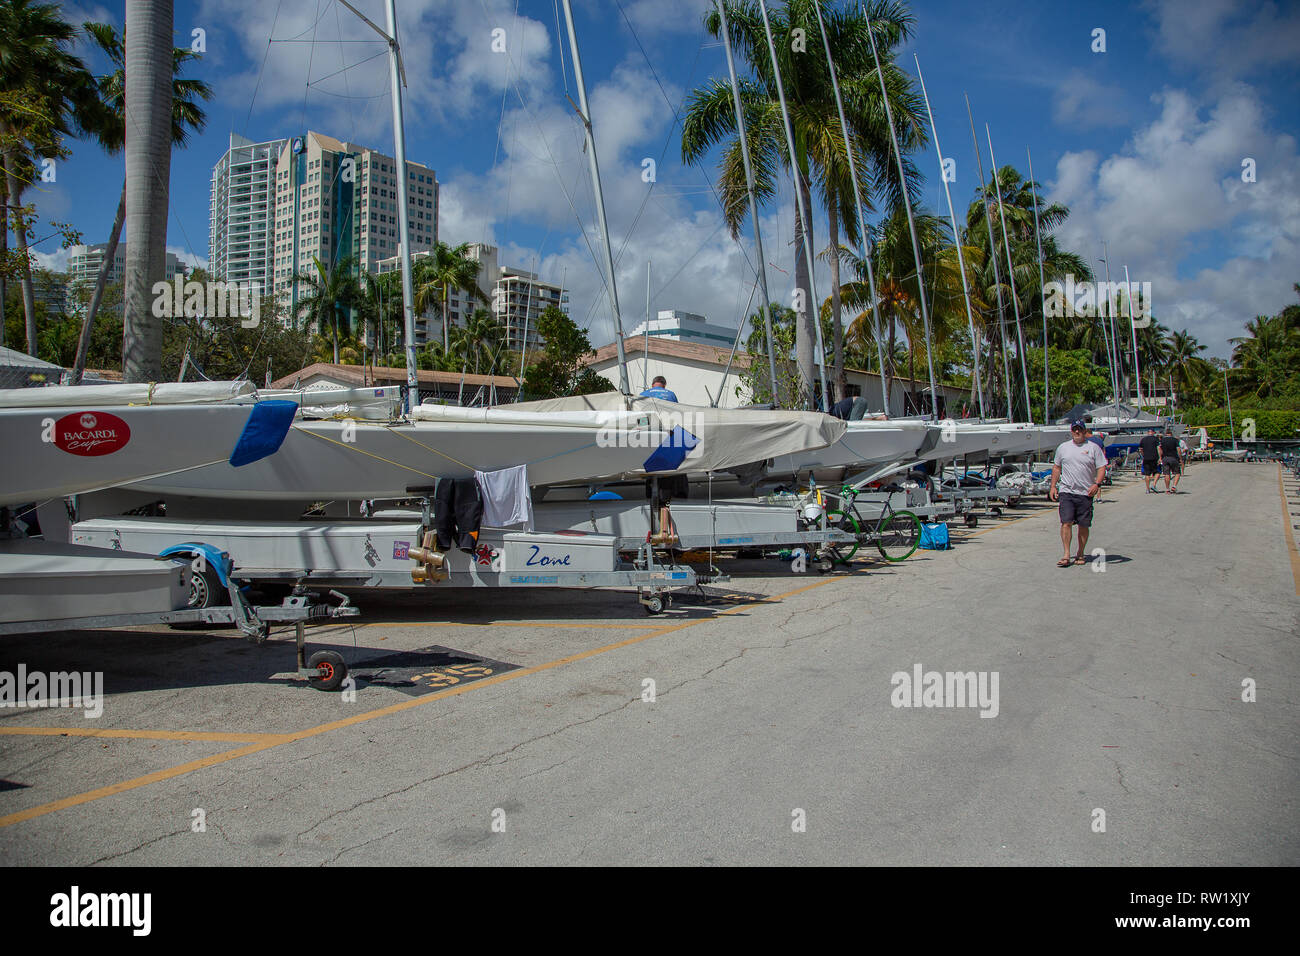 Star Class Racing Yachts lined up at the Coral Reef Yacht Club, Bacardi Cup Invitational Regatta 2019 Stock Photo